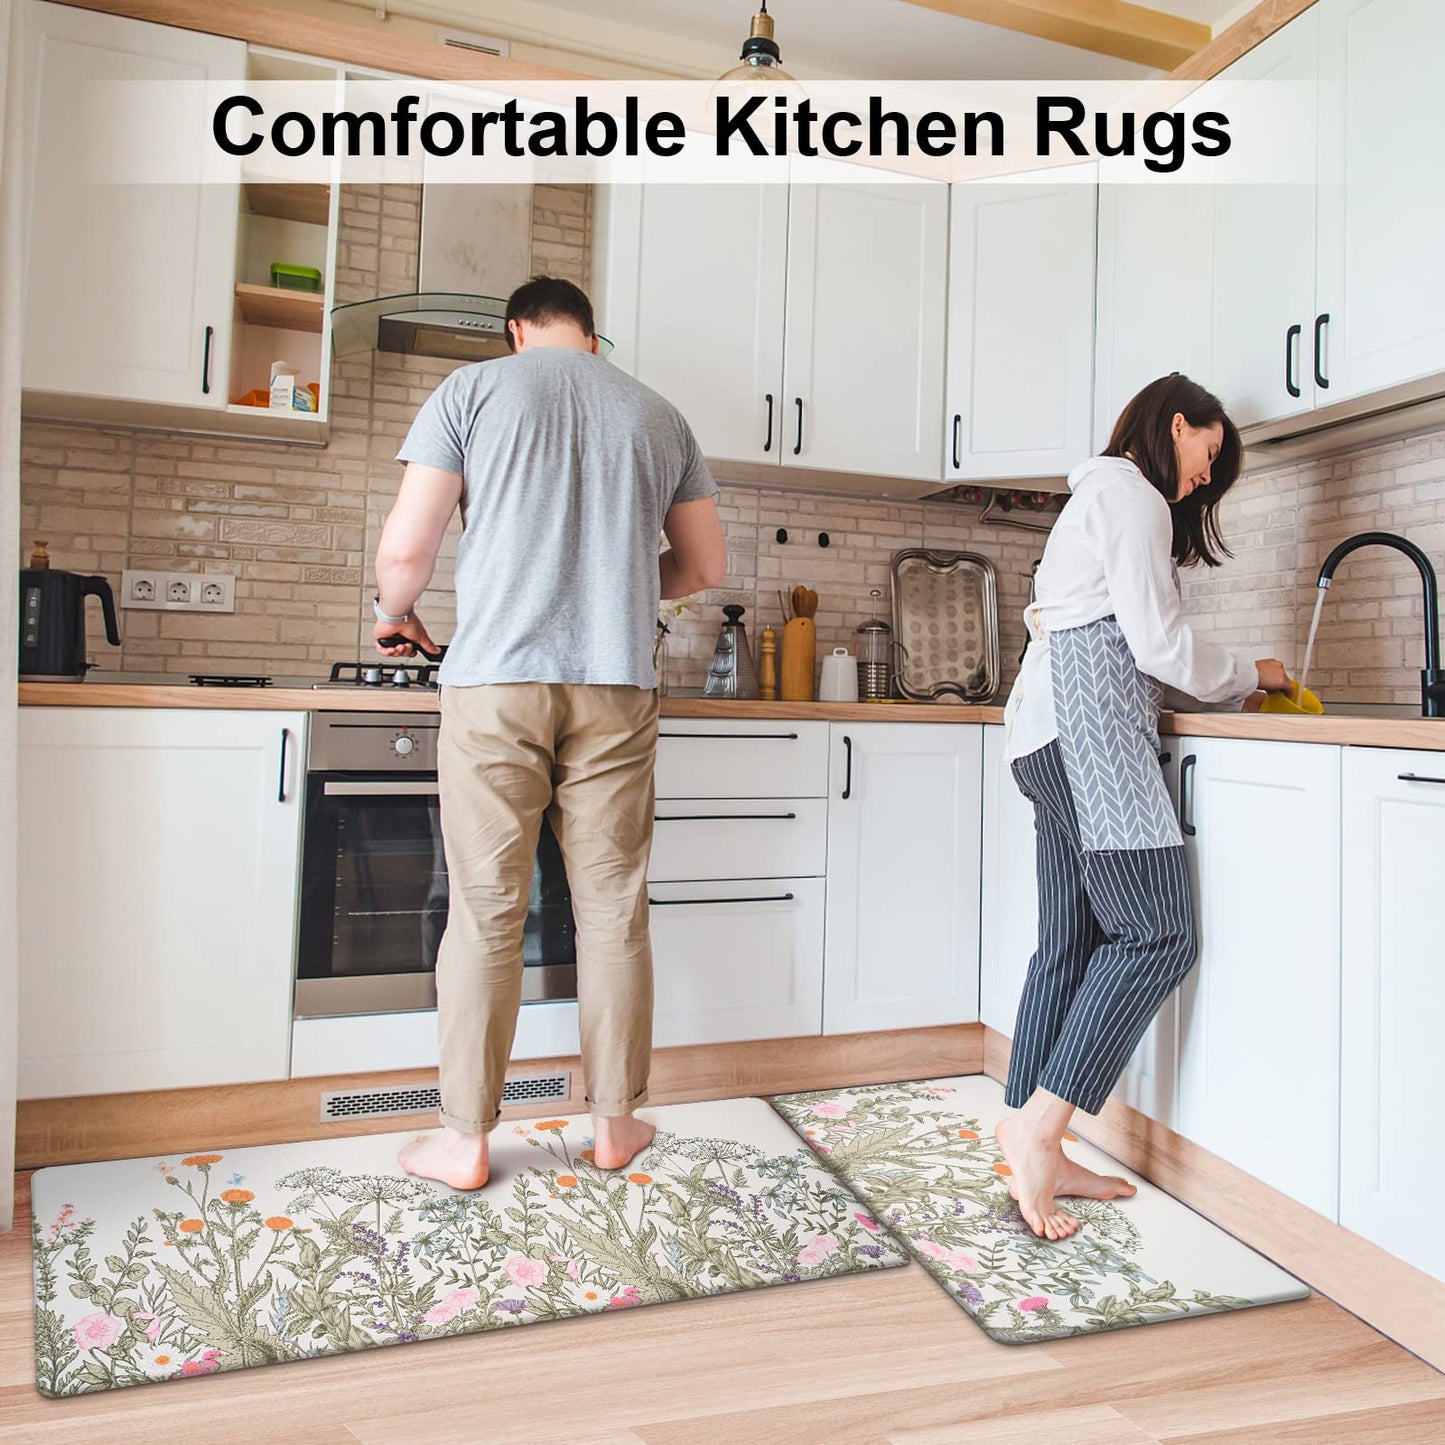 Alishomtll 2 PCS Kitchen Rugs and Mats, Floral Cushioned Anti-Fatigue Kitchen Rugs, Waterproof Non-Slip Washable Flowers Kitchen Mats for Kitchen